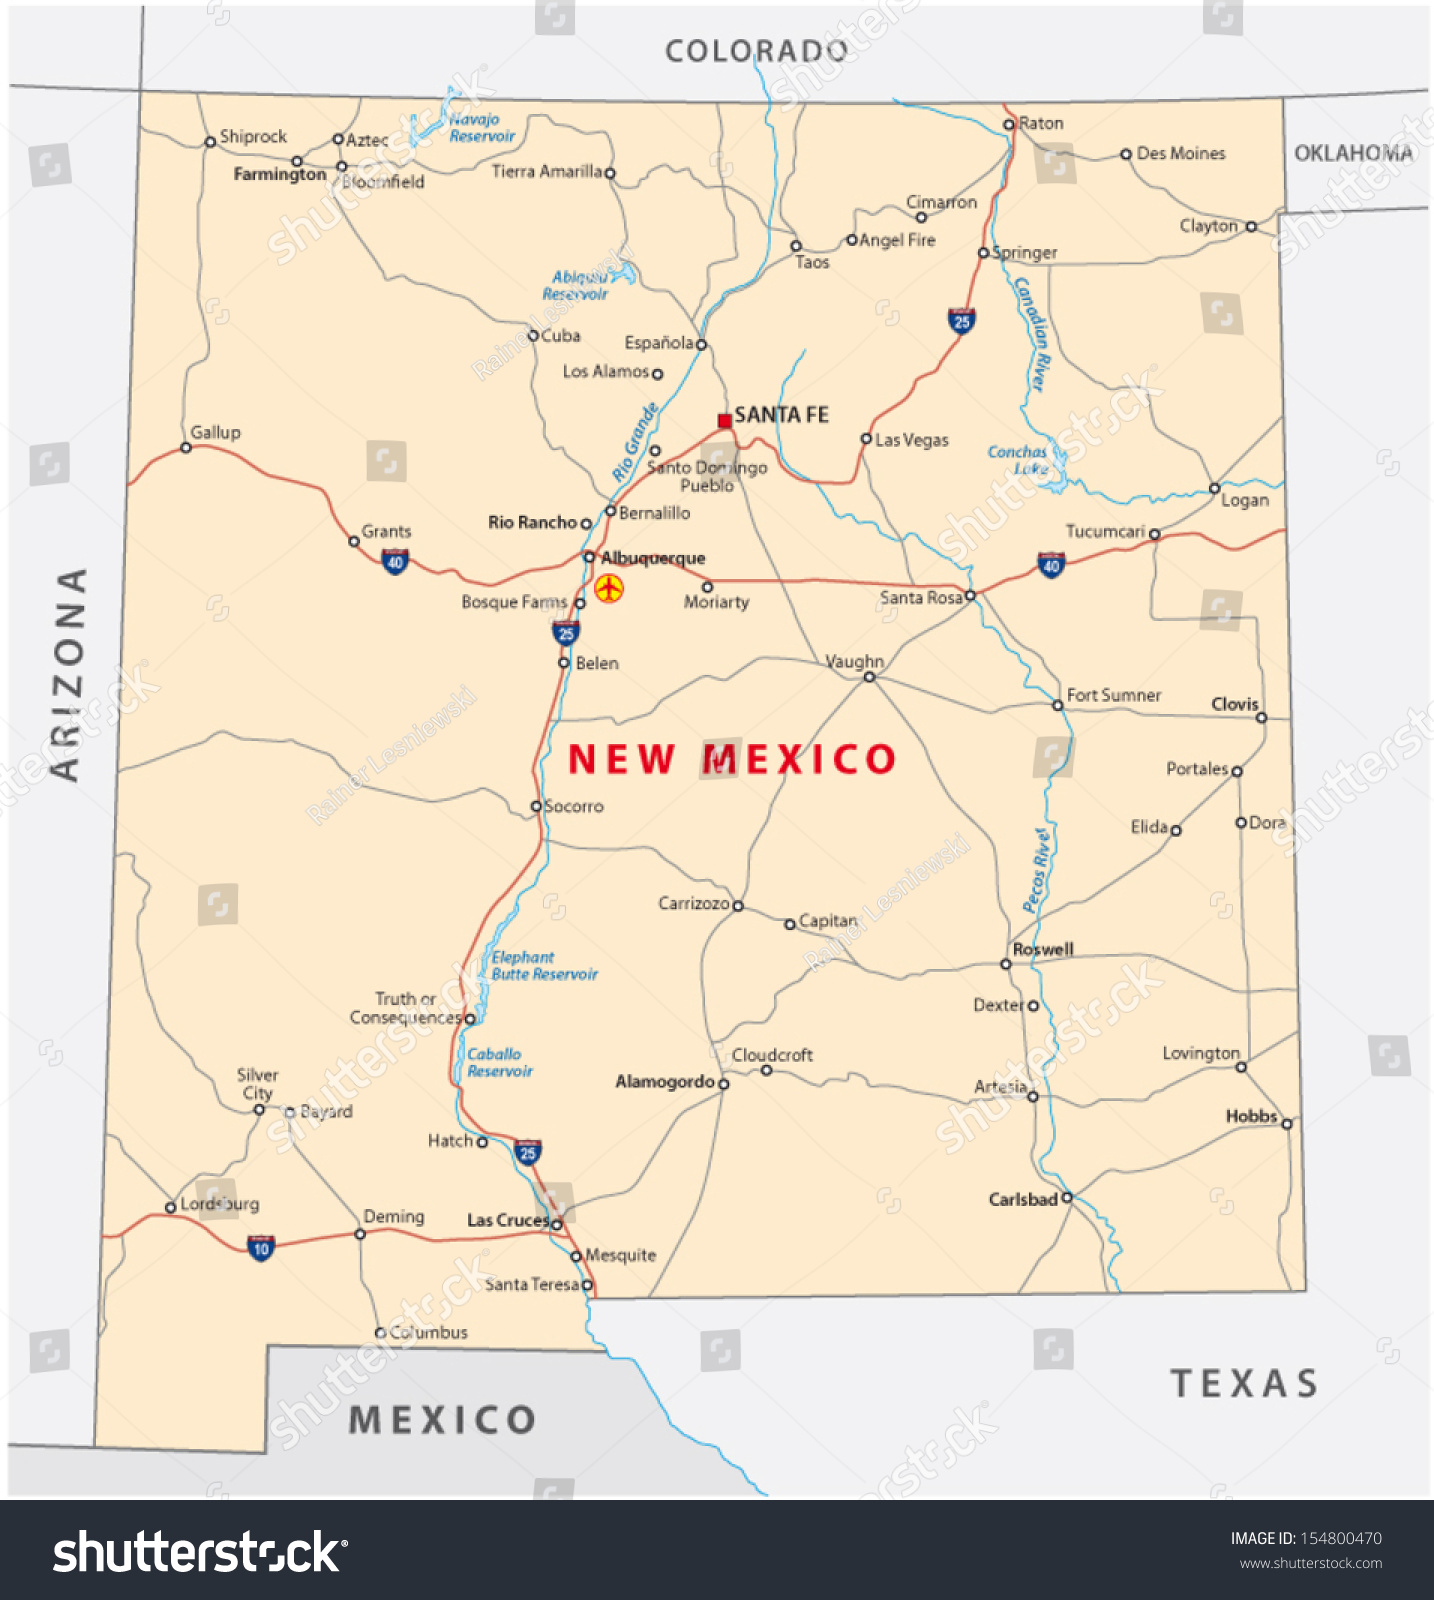 New Mexico Road Map Stock Vector (Royalty Free) 154800470 | Shutterstock